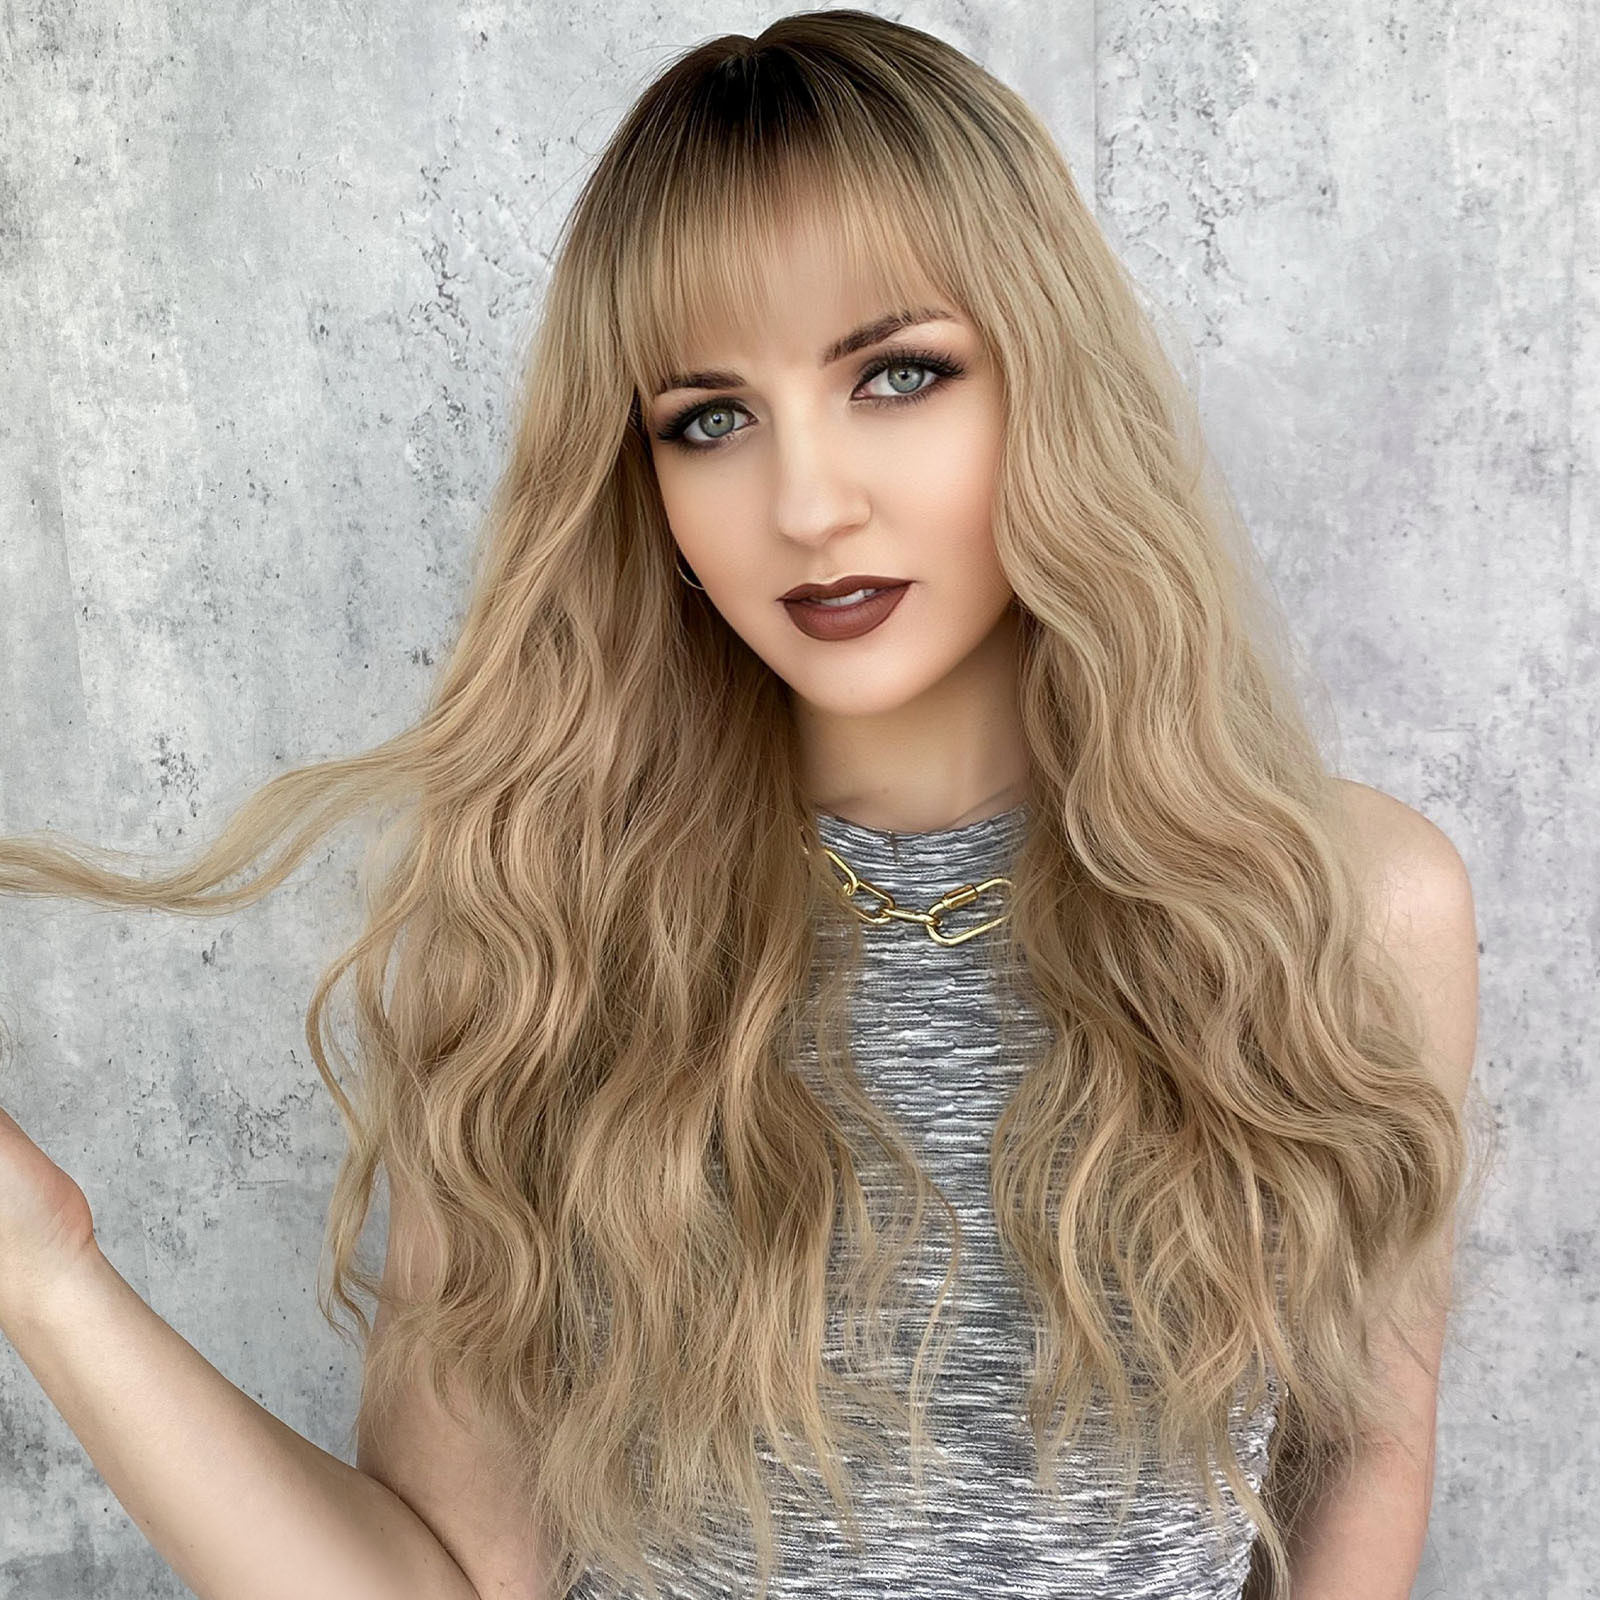 A synthetic wig designed for women's fashion, featuring long wavy blonde hair set on a rose net for easy styling